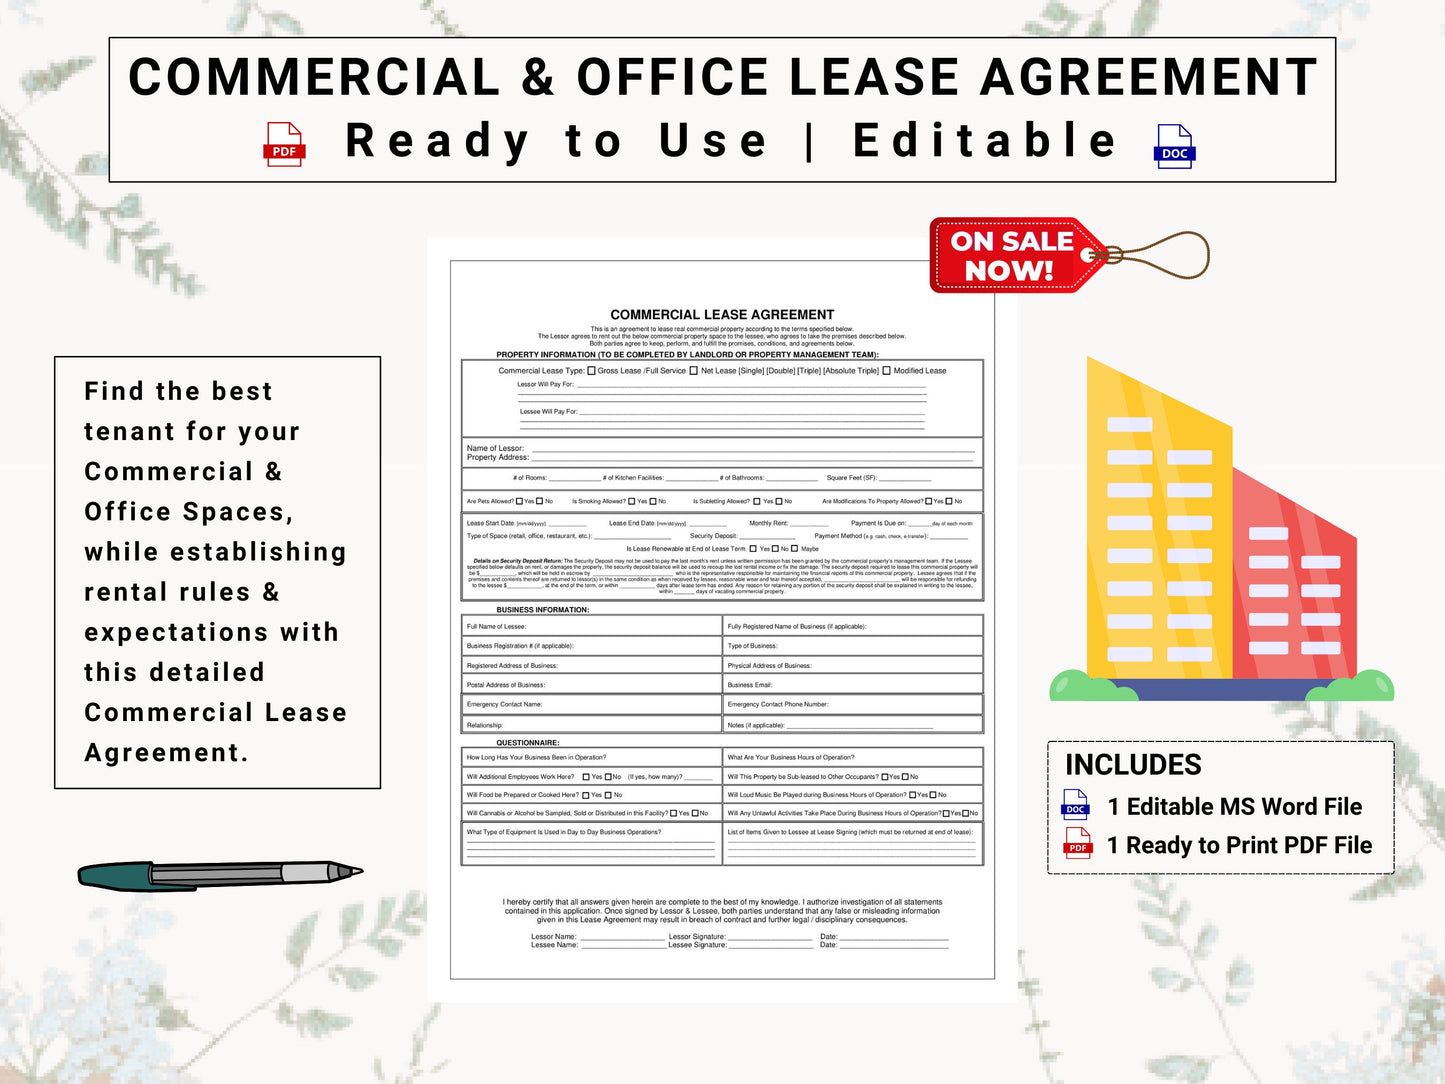 Commercial Lease / Office Space Rental Contract | Establish Rules & Expectations for Short Term, Long Term Rentals of Commercial Real Estate